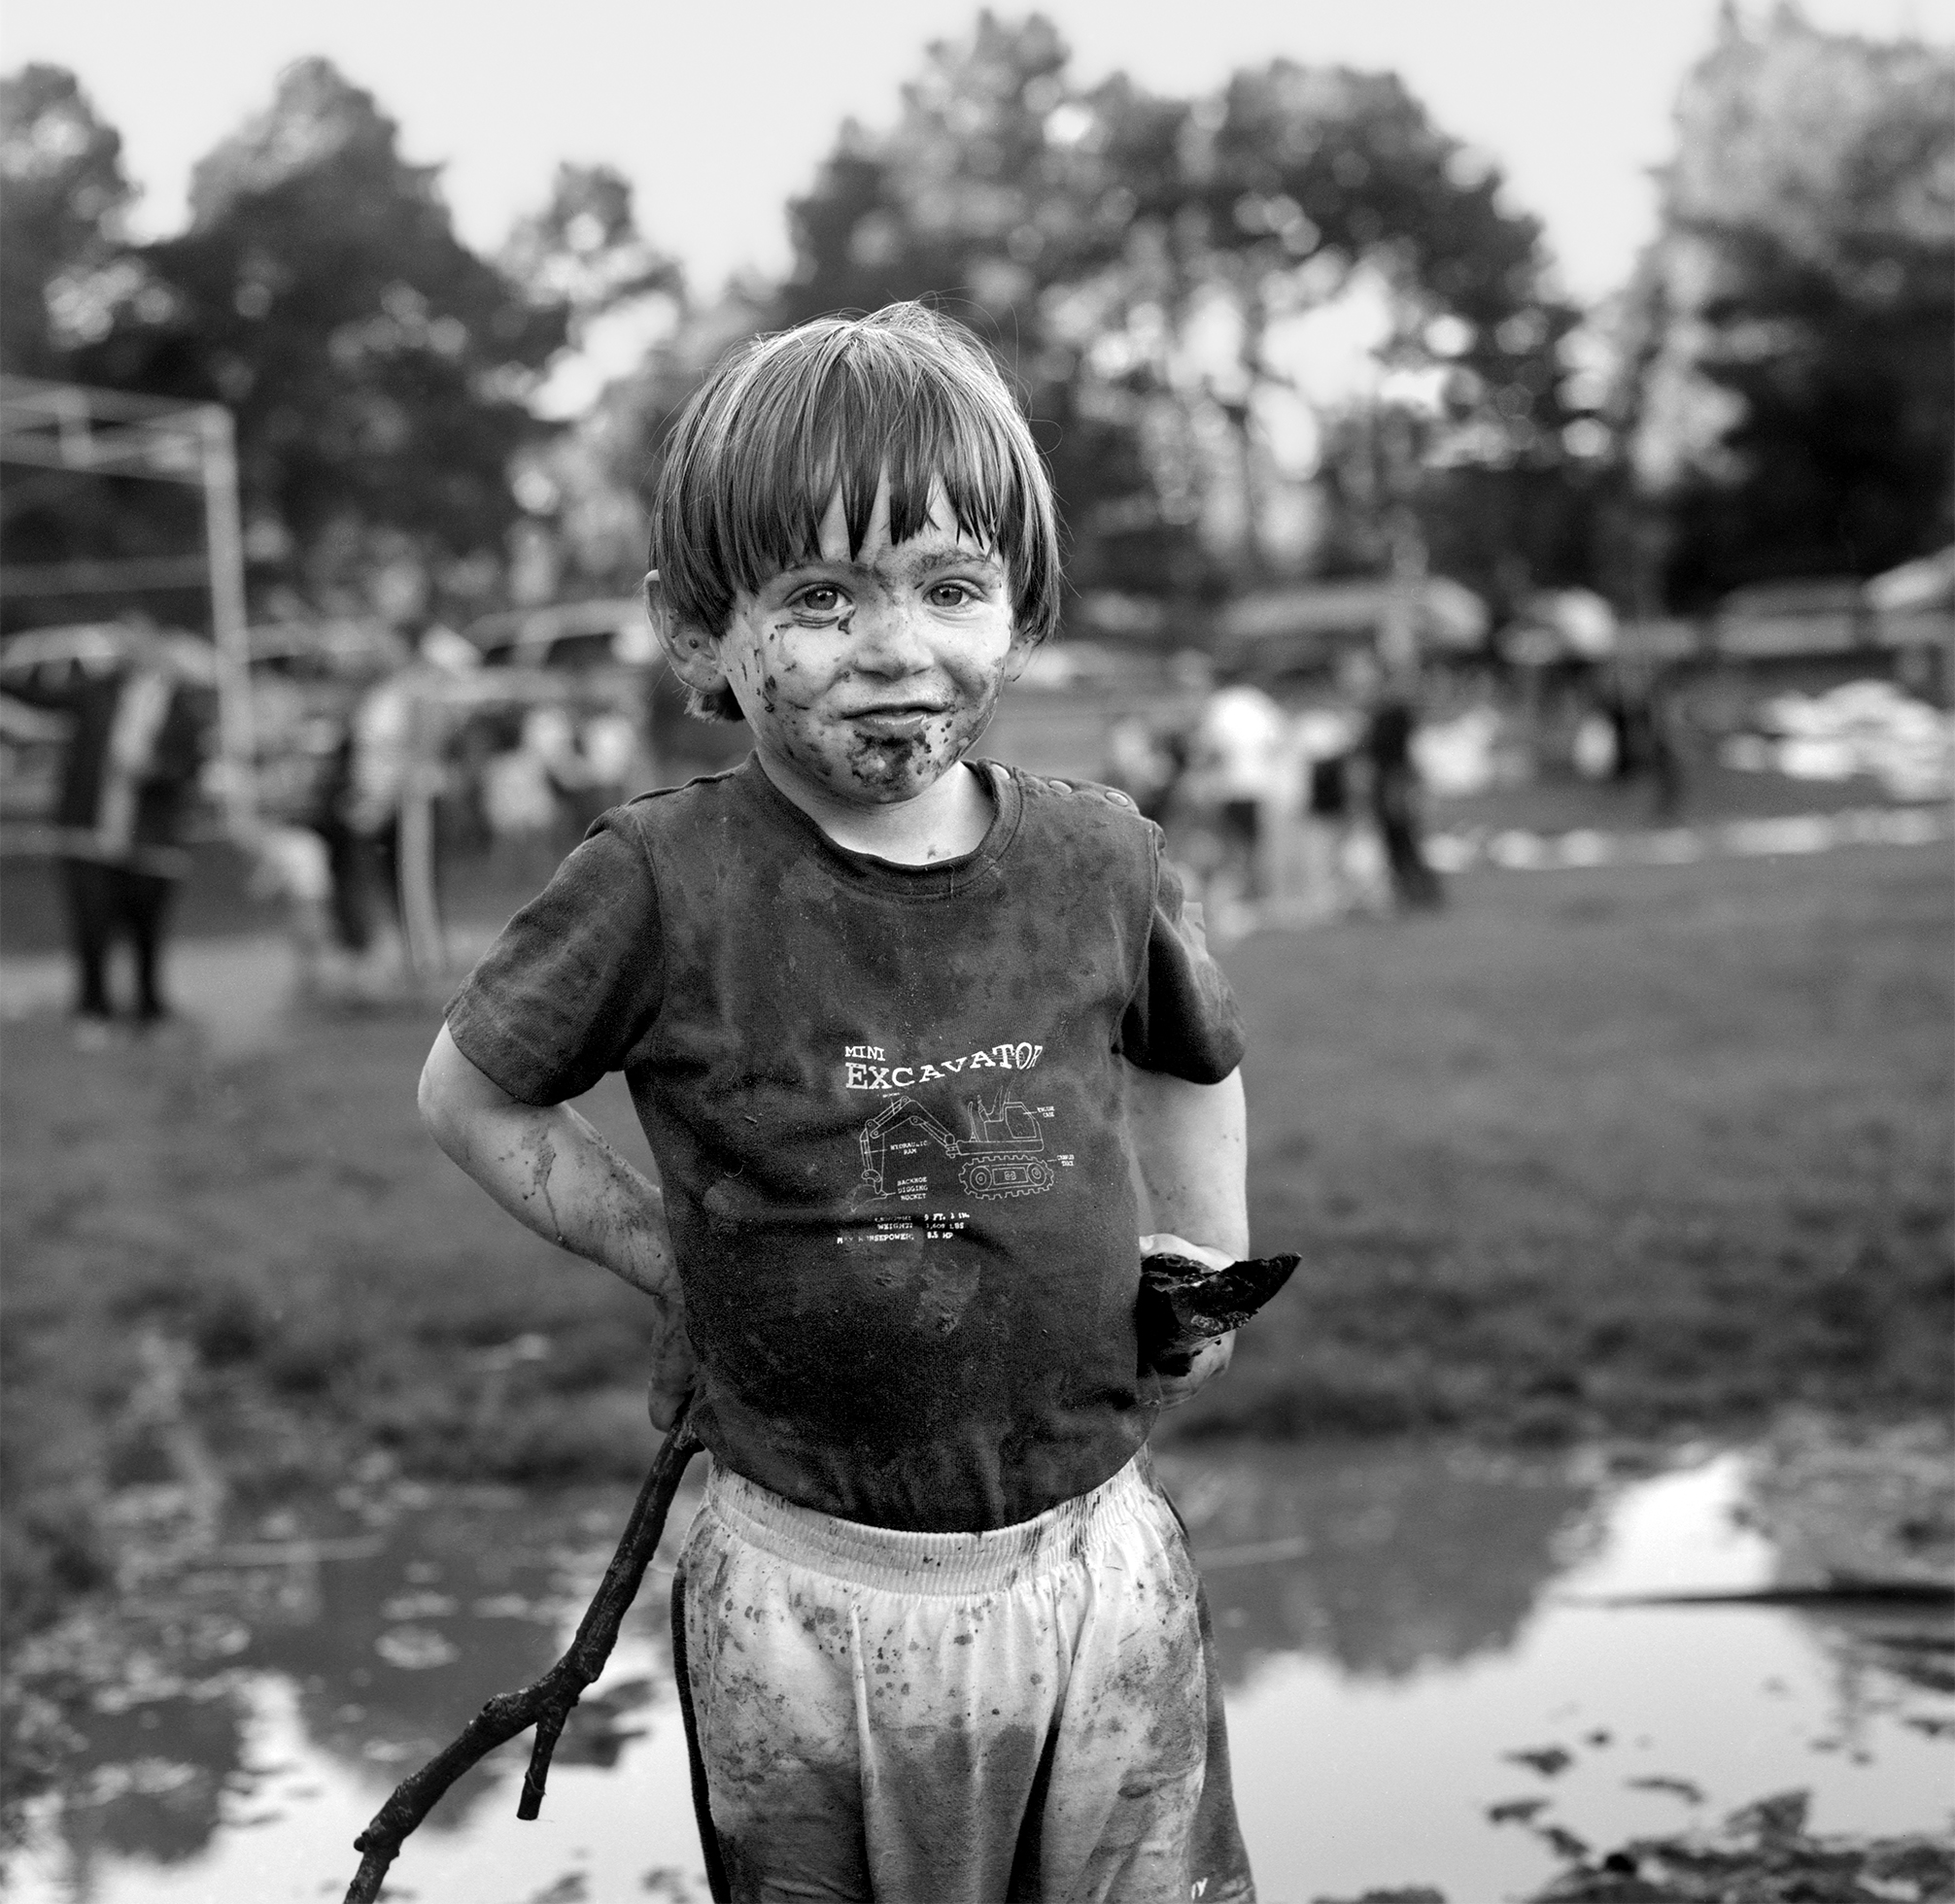 A small boy wearing a T-shirt and once-white shorts stands in a large puddle holding a stick as he looks at the camera in a public park in Oakland, California. He is covered in mud and looks pleased with himself.